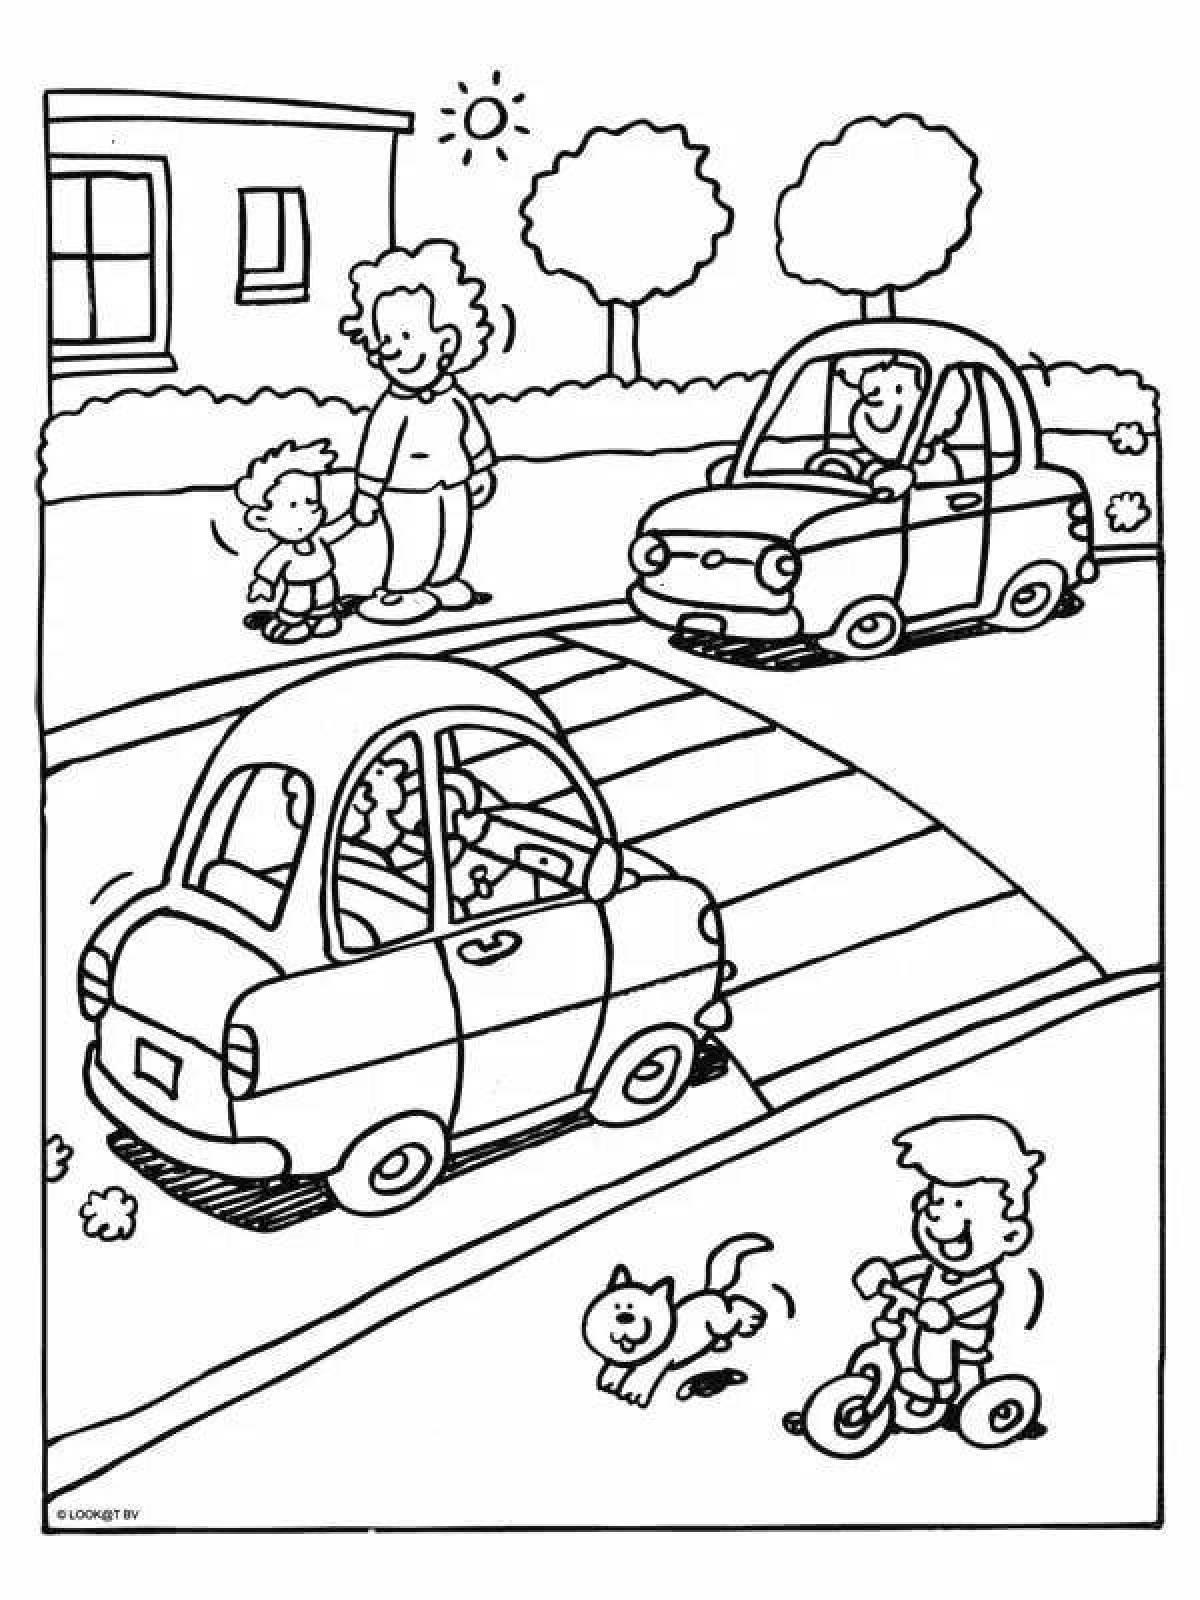 Detailed traffic coloring page